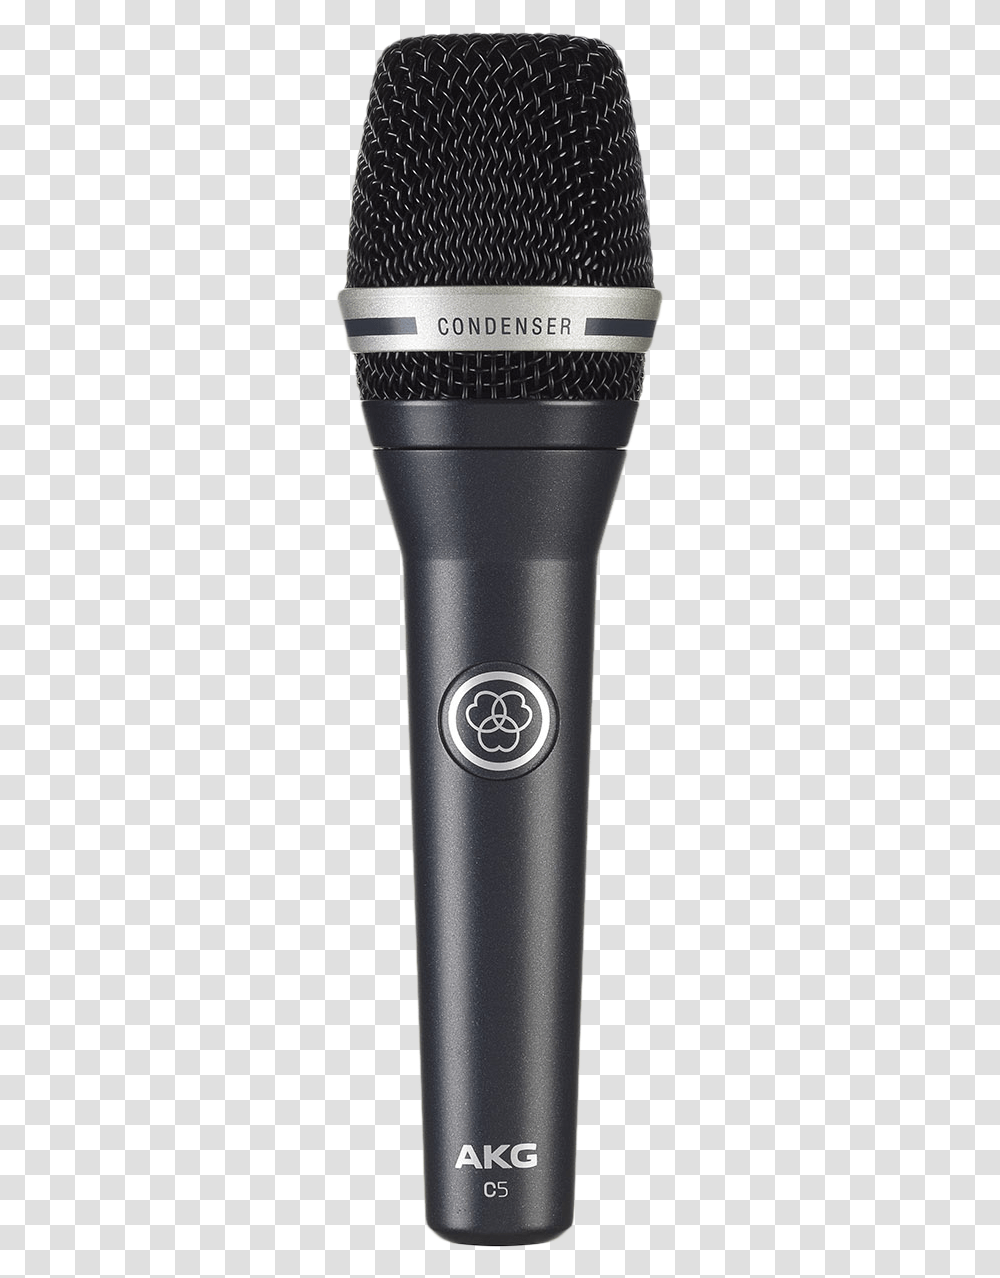 Microfono Akg D5 S, Electrical Device, Microphone, Shaker, Bottle Transparent Png